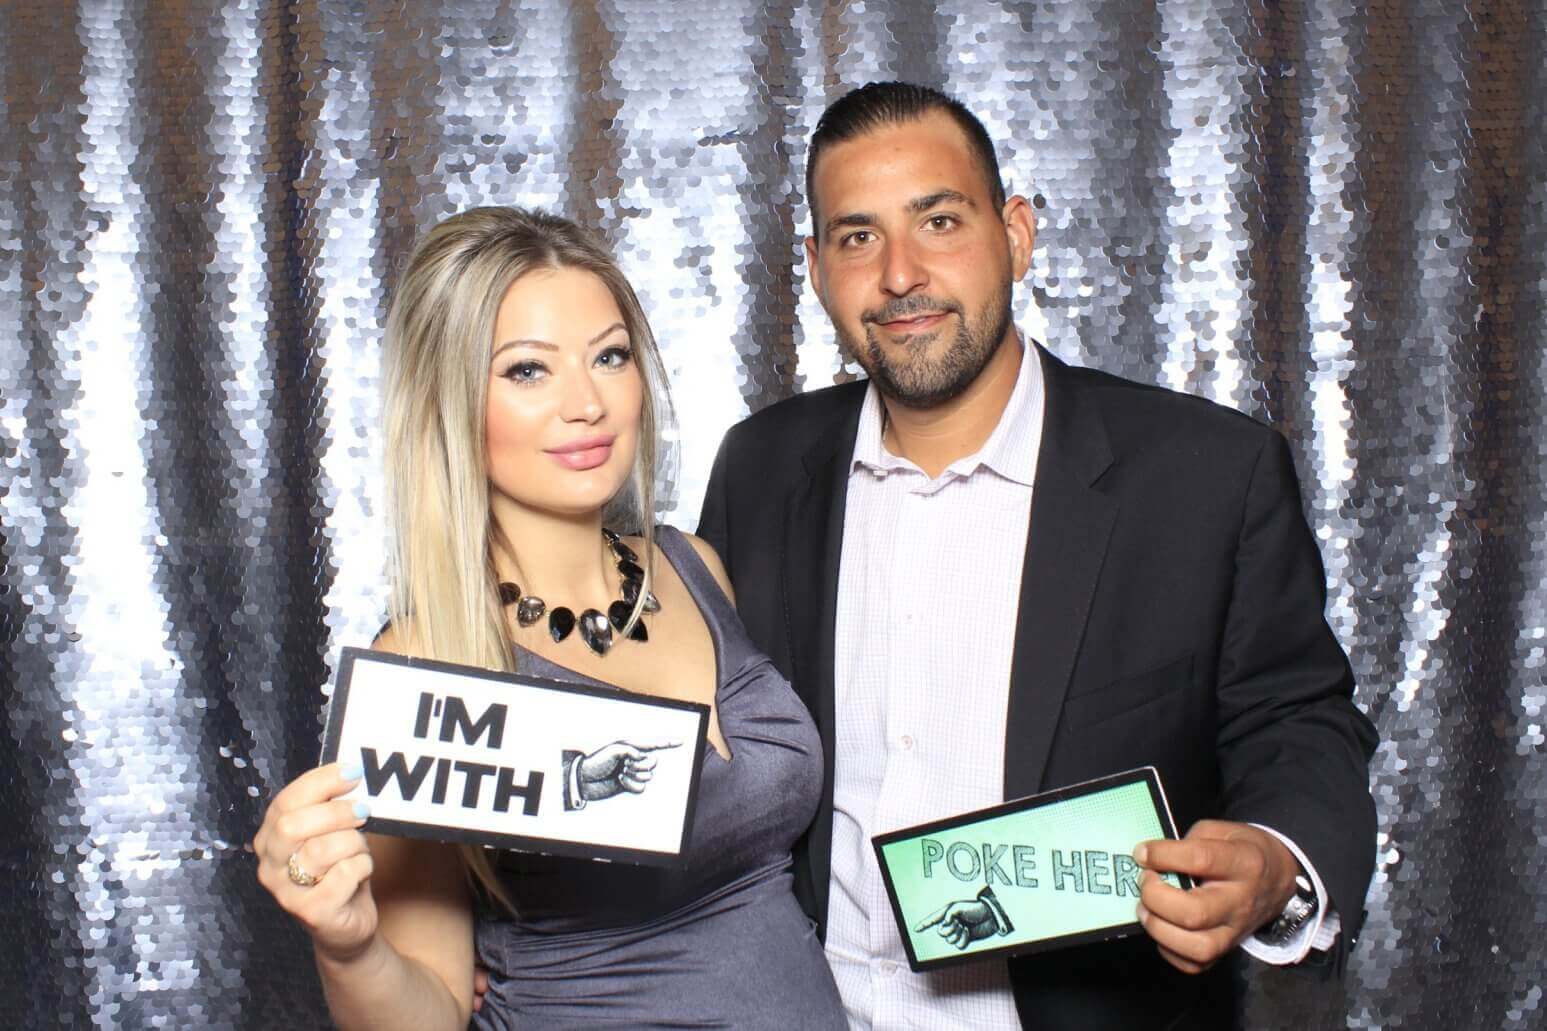 Photo booth rental in Toronto for an event. Posing in front of a beautiful silver scale backdrop offered by LOL Photo Booth. Tags: Event planning ideas, Photo booth prints, high resolution photos, Toronto photo booth rental services. GIFS, Boomerangs, Mosaic Walls, Slow motion, brand activation.